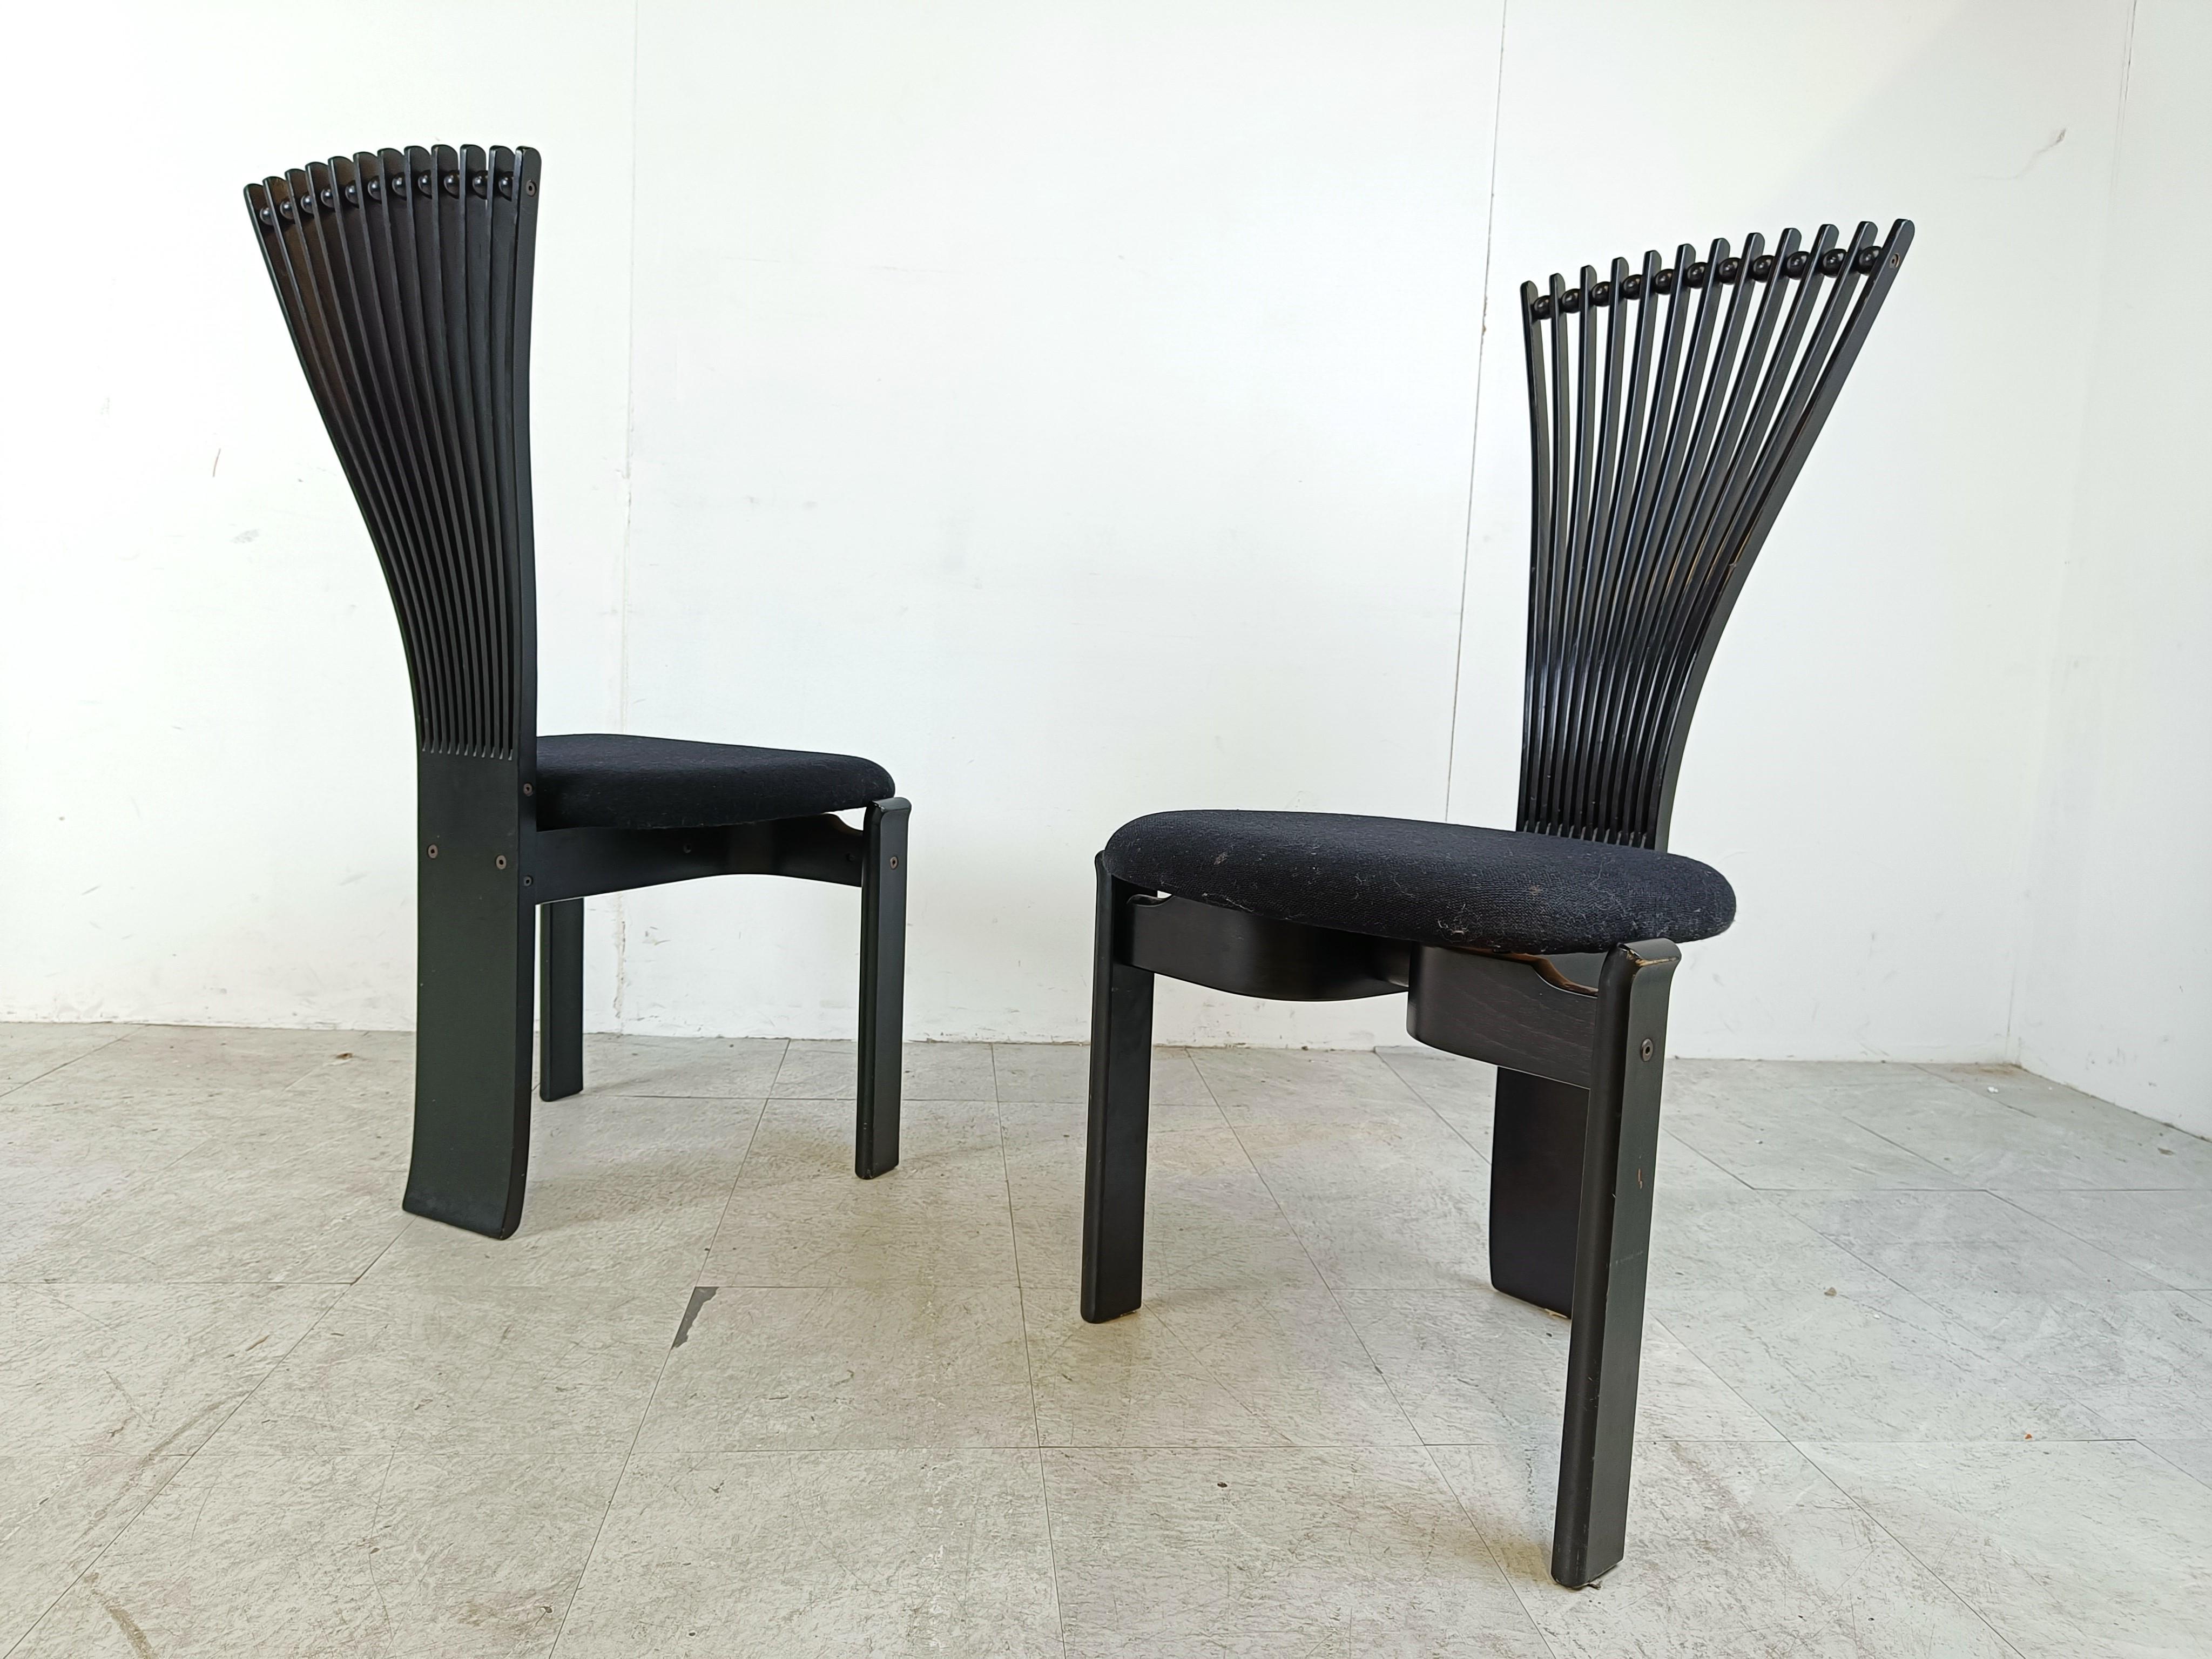 Totem chairs by Torstein Nislen for Westnofa, 1980s For Sale 1